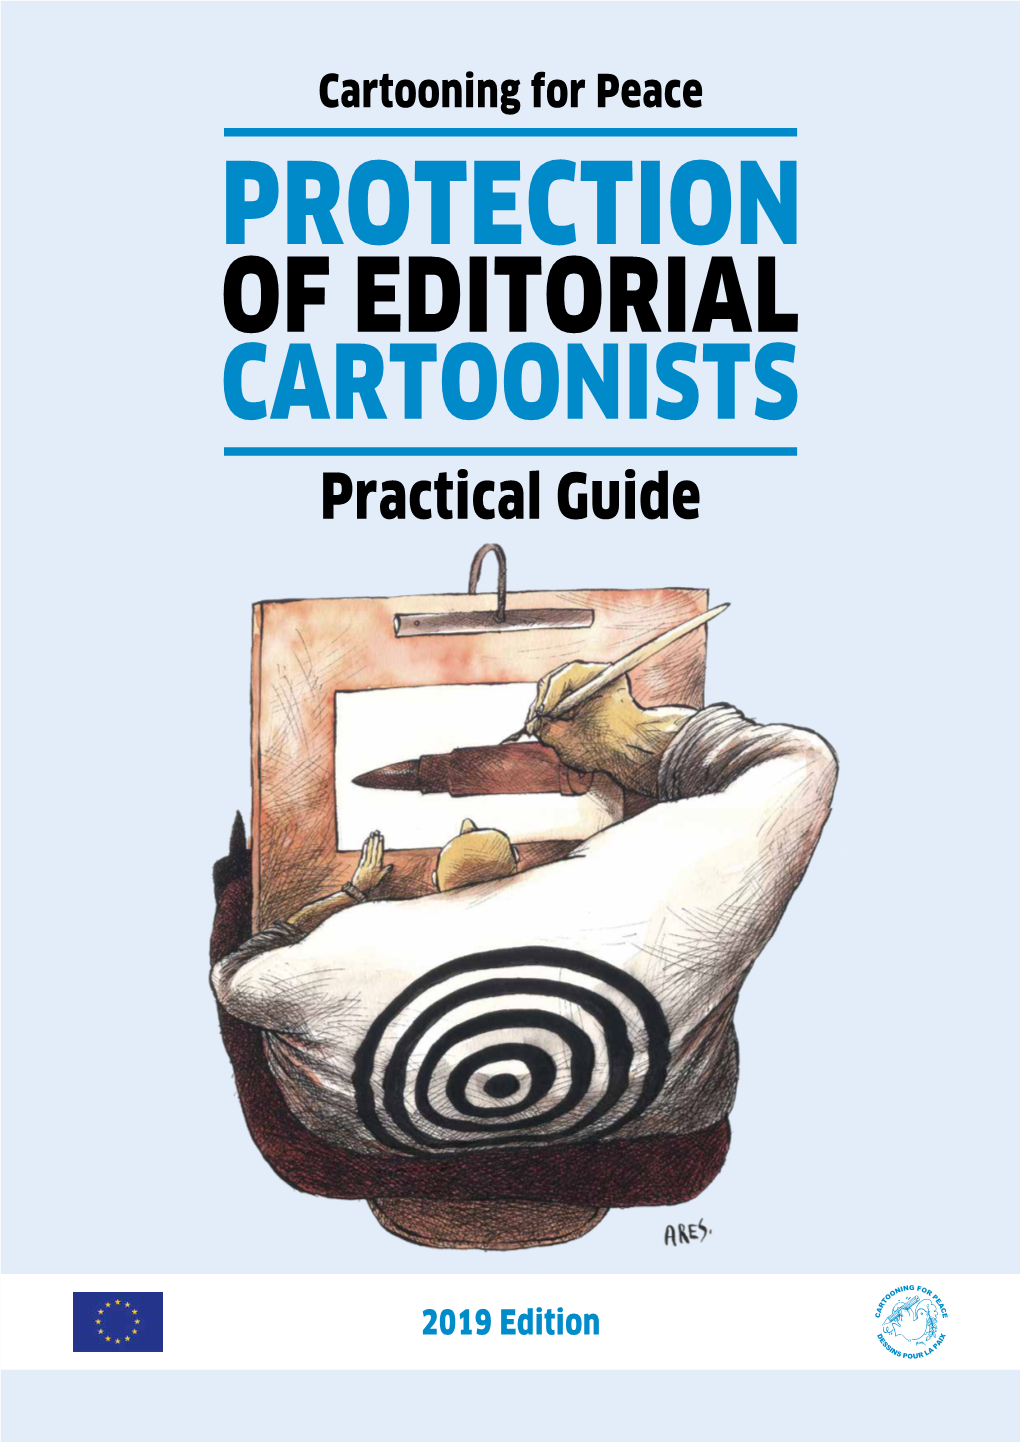 PROTECTION of EDITORIAL CARTOONISTS Practical Guide